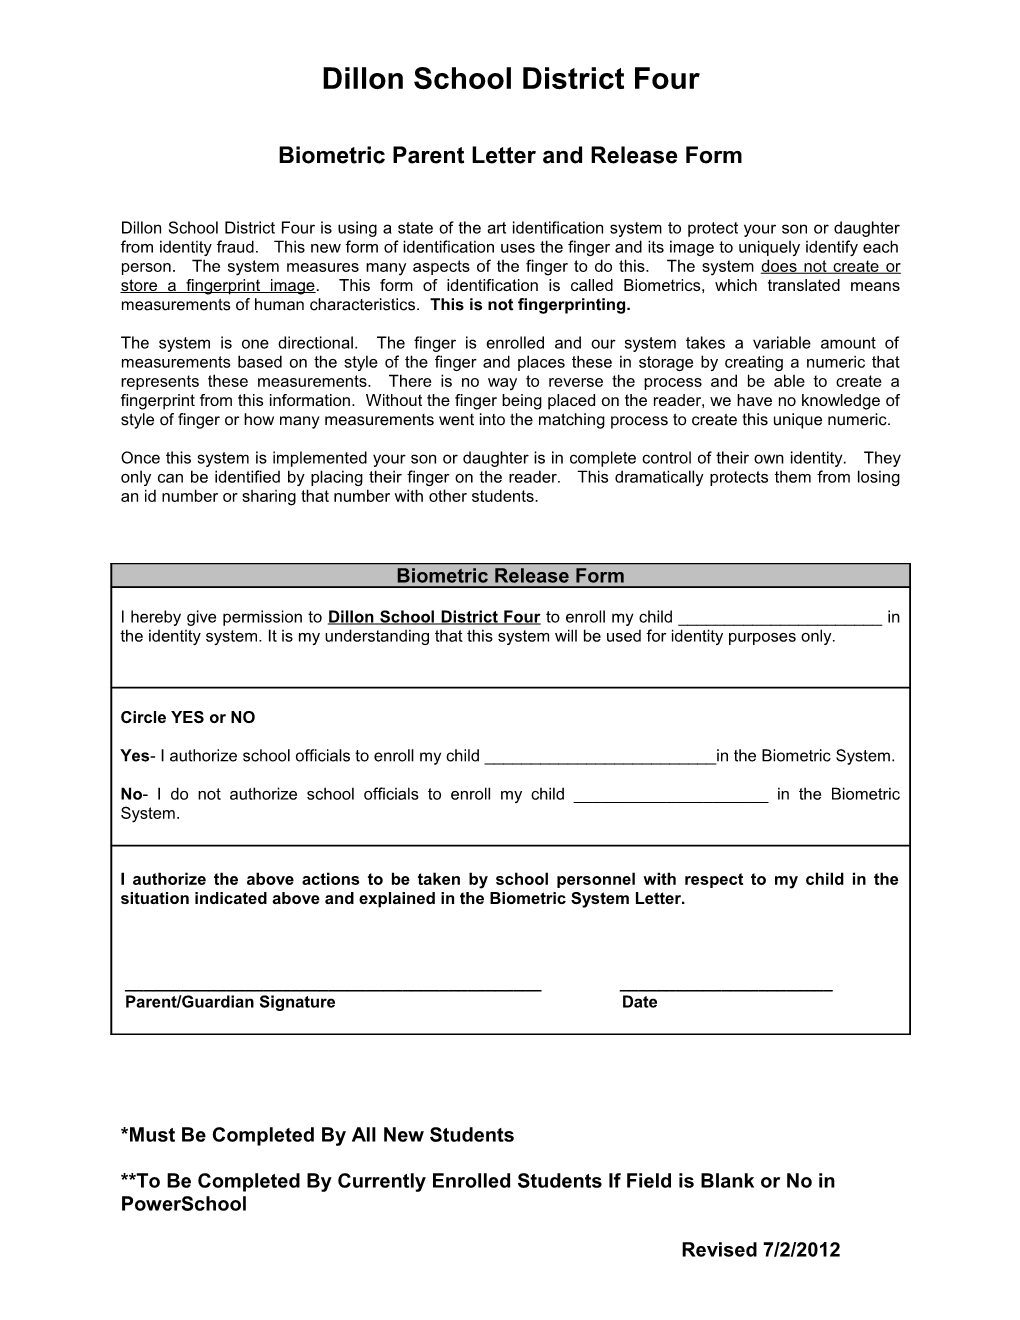 Biometric Parent Letter and Release Form